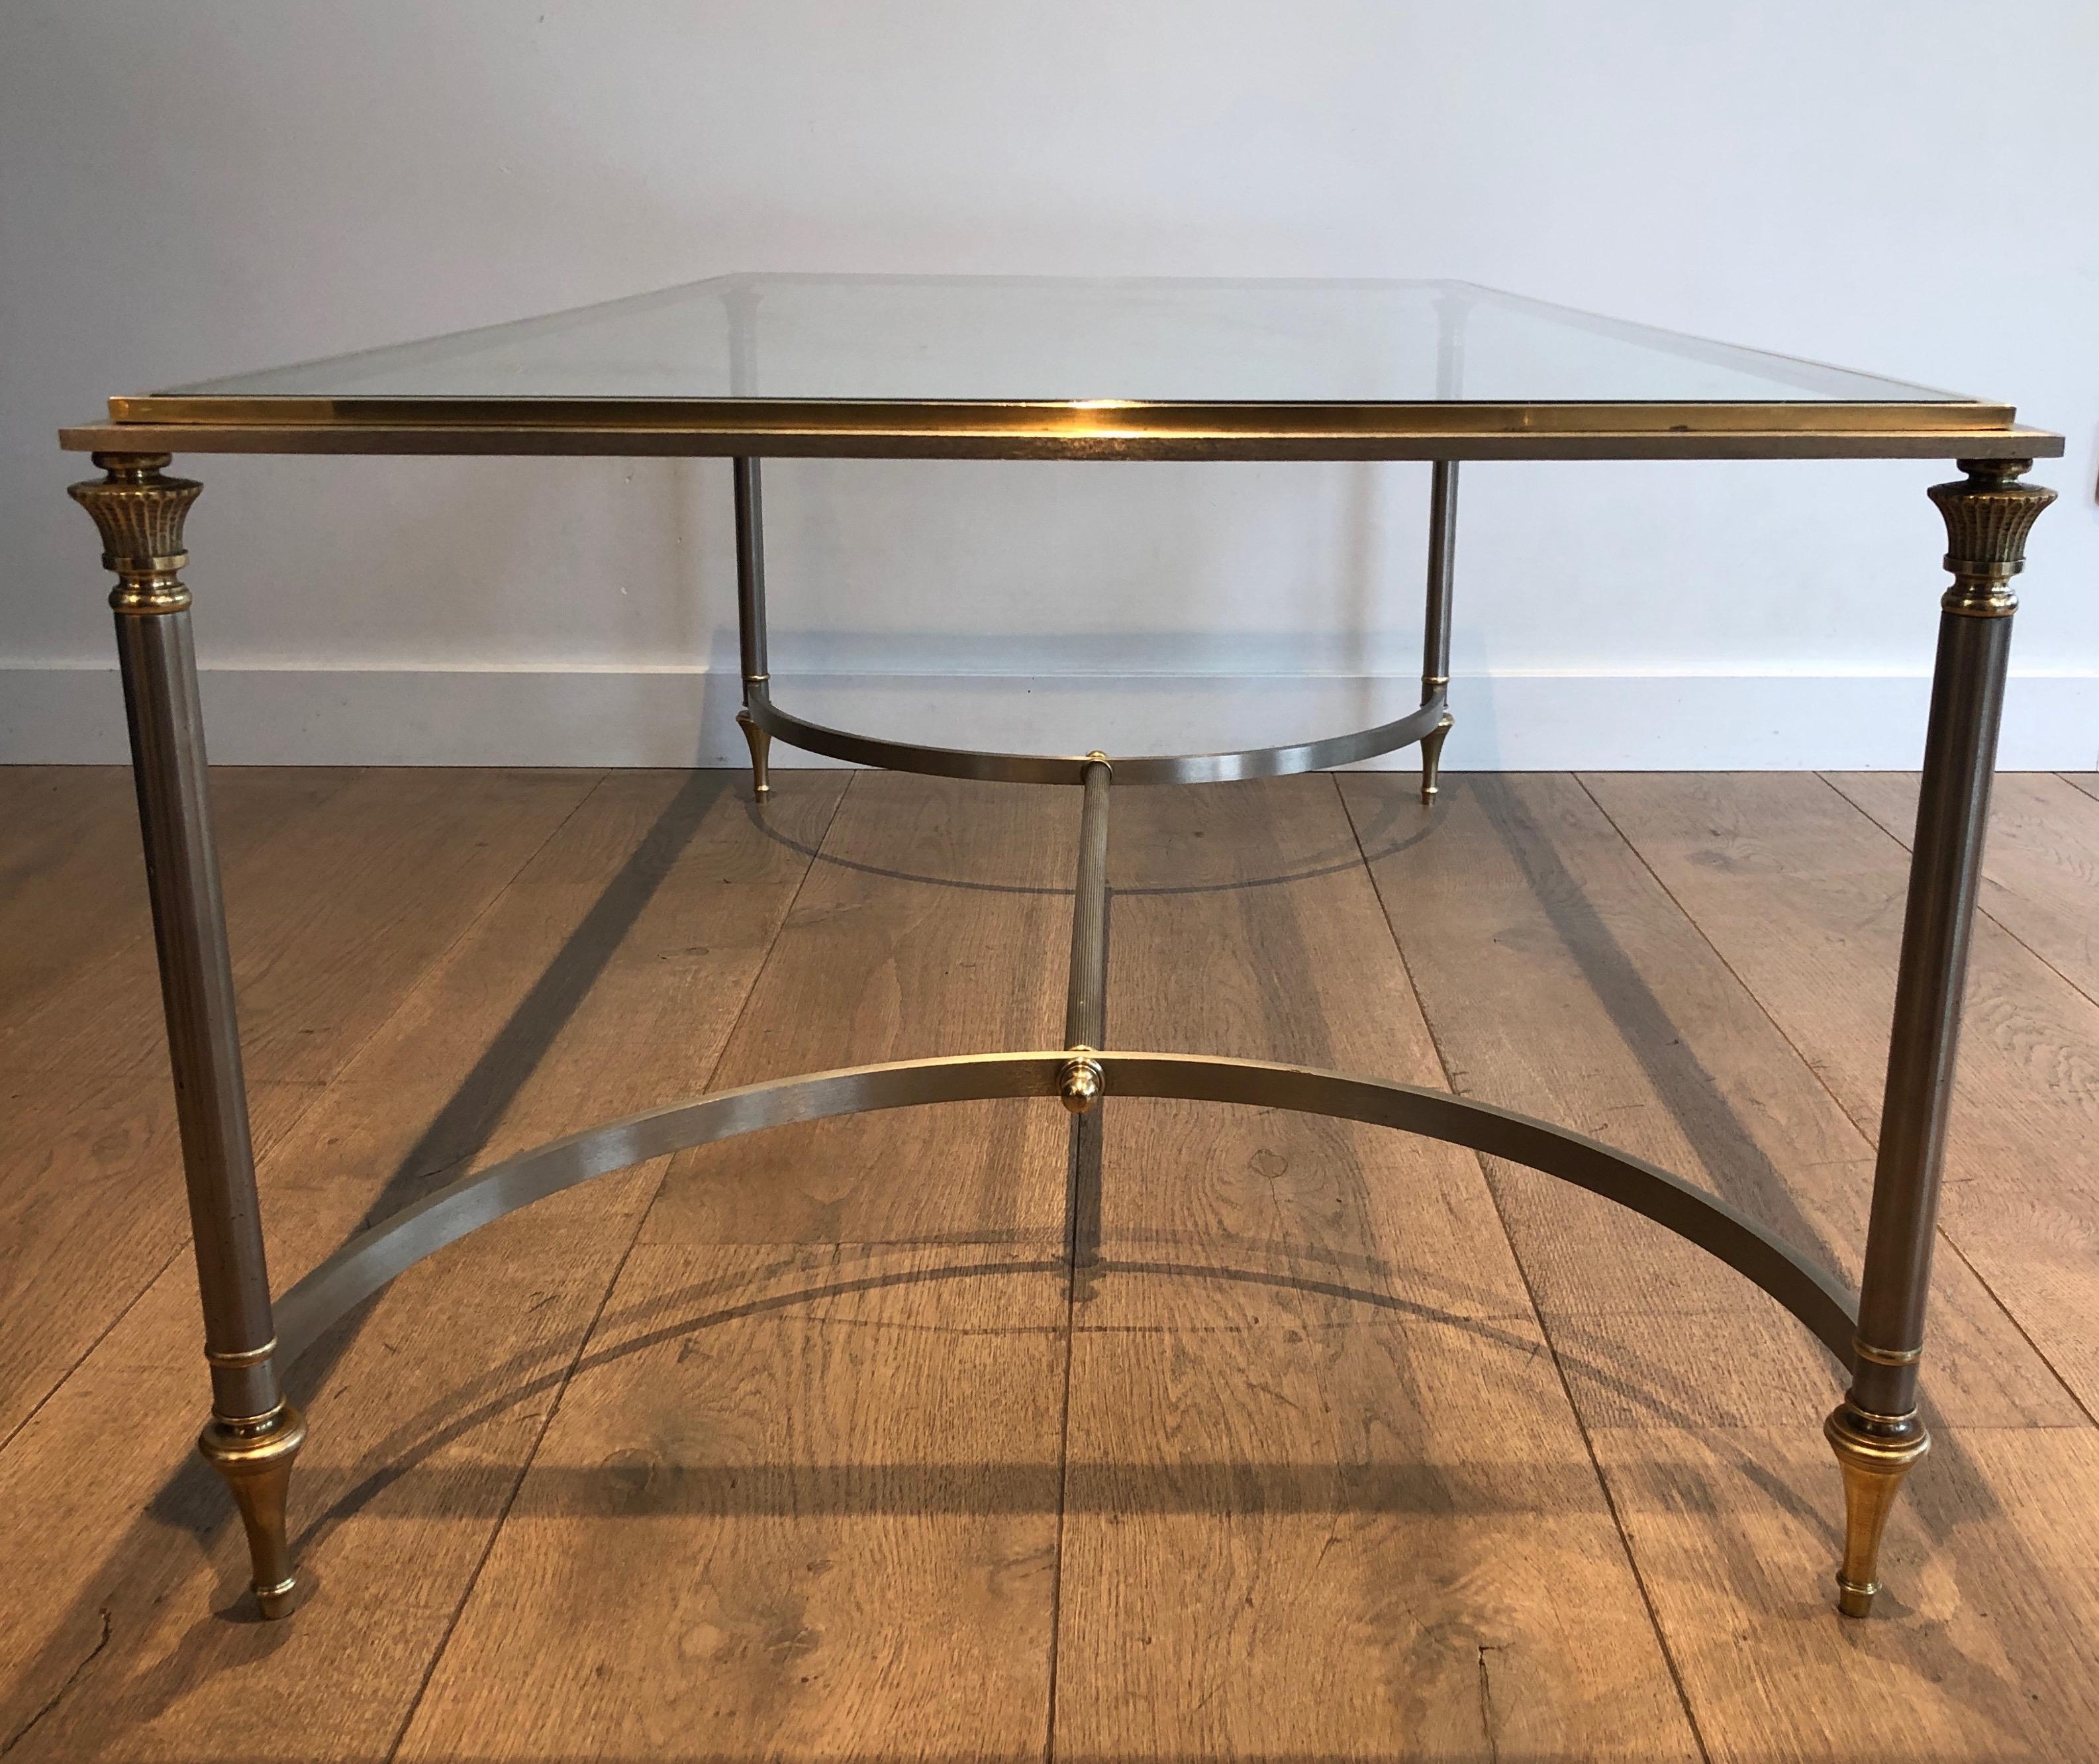 20th Century Brushed Steel and Brass Coffee Table. French Work by Maison Jansen, circa 1940